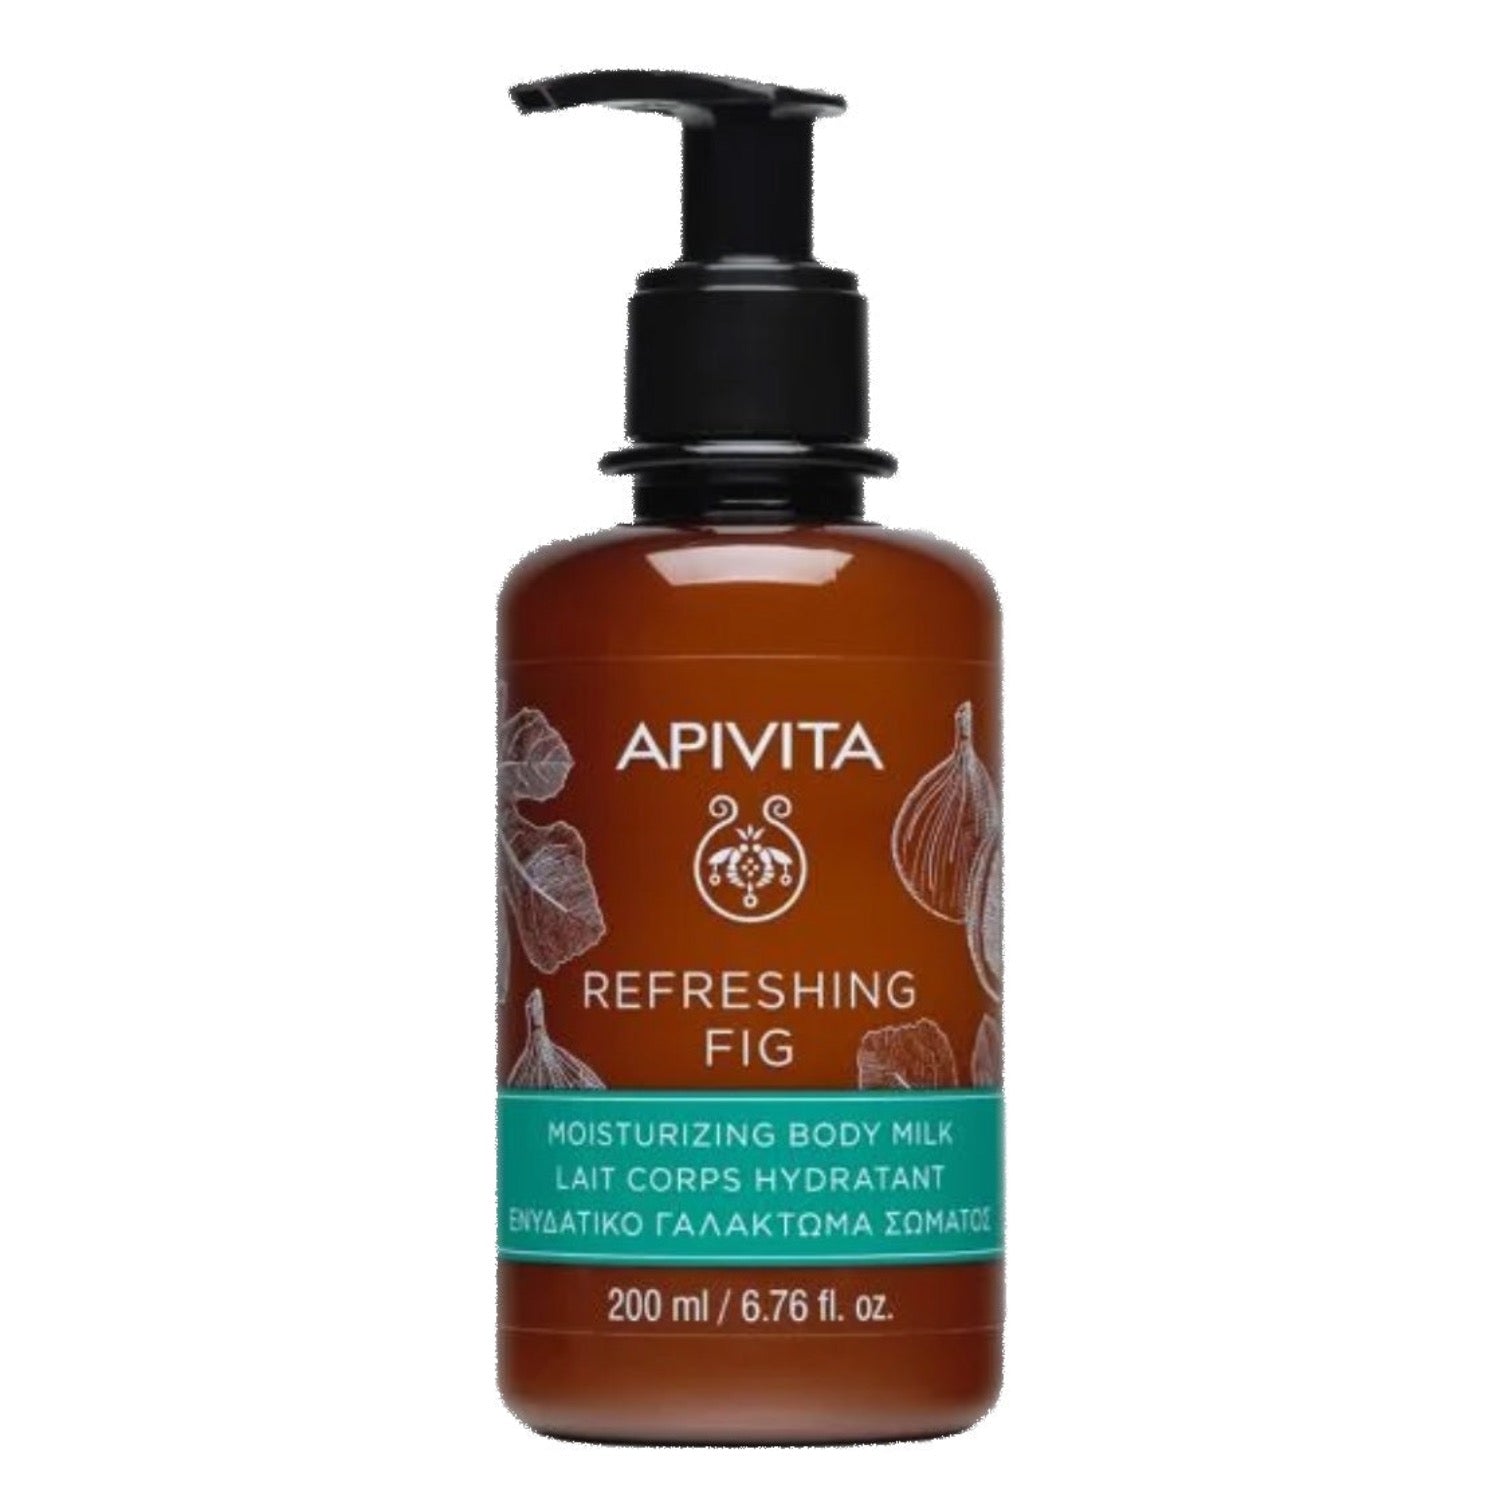 Apivita Refreshing Fig body milk is Inspired by aromatherapy, its fig extract moisturises and provides softness, while lavender and geranium essential oils energise the senses.